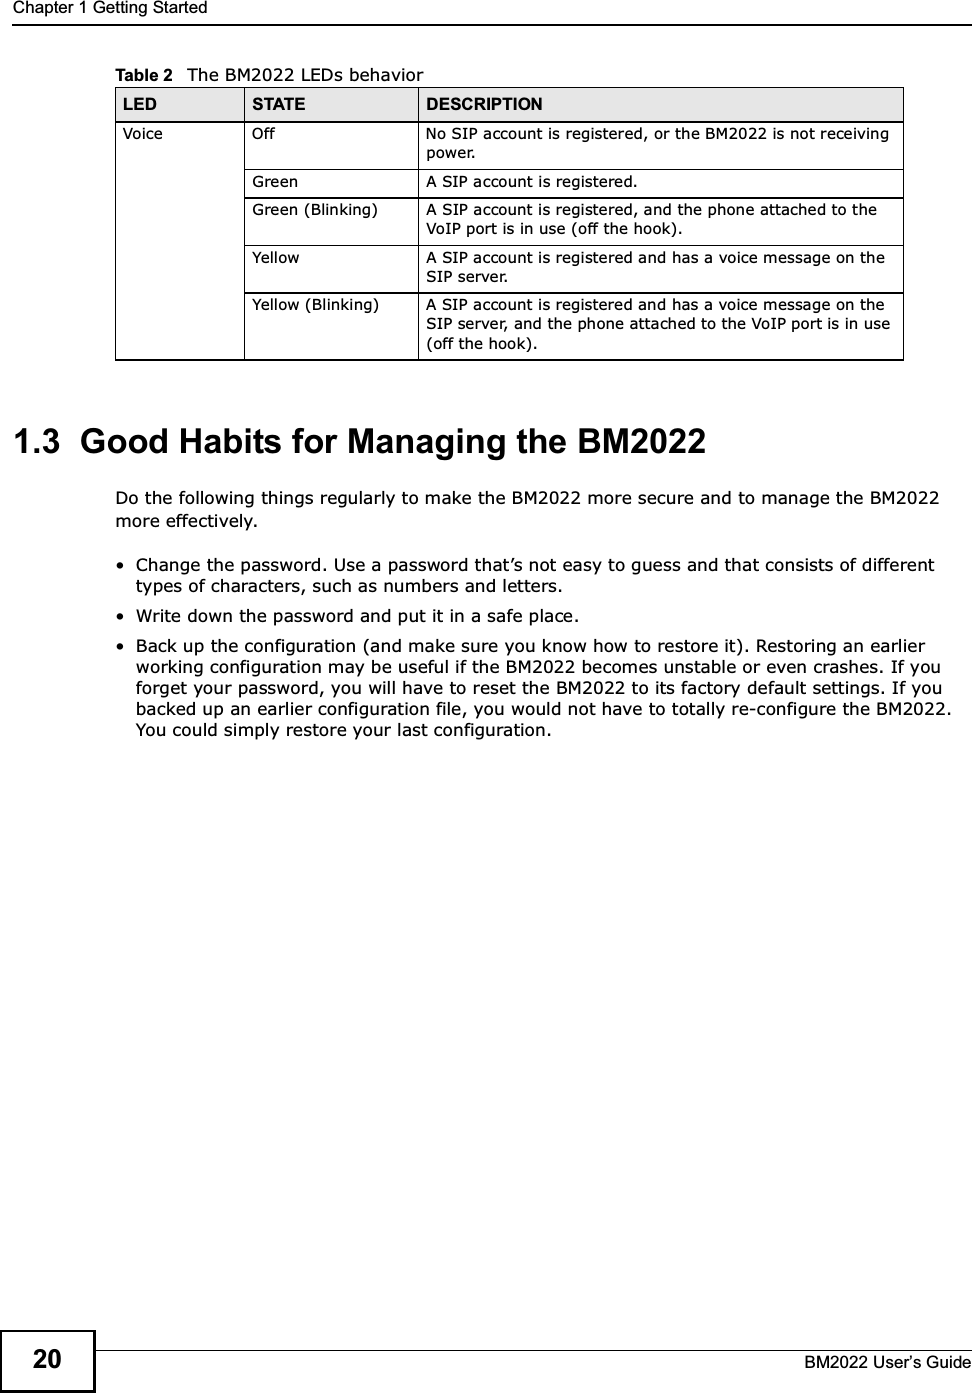 Chapter 1 Getting StartedBM2022 Users Guide201.3  Good Habits for Managing the BM2022Do the following things regularly to make the BM2022 more secure and to manage the BM2022 more effectively. Change the password. Use a password thats not easy to guess and that consists of different types of characters, such as numbers and letters. Write down the password and put it in a safe place. Back up the configuration (and make sure you know how to restore it). Restoring an earlier working configuration may be useful if the BM2022 becomes unstable or even crashes. If you forget your password, you will have to reset the BM2022 to its factory default settings. If you backed up an earlier configuration file, you would not have to totally re-configure the BM2022. You could simply restore your last configuration.Voice Off No SIP account is registered, or the BM2022 is not receiving power.Green A SIP account is registered.Green (Blinking) A SIP account is registered, and the phone attached to the VoIP port is in use (off the hook).Yellow A SIP account is registered and has a voice message on the SIP server.Yellow (Blinking) A SIP account is registered and has a voice message on the SIP server, and the phone attached to the VoIP port is in use (off the hook).Table 2   The BM2022 LEDs behaviorLED STATE DESCRIPTION